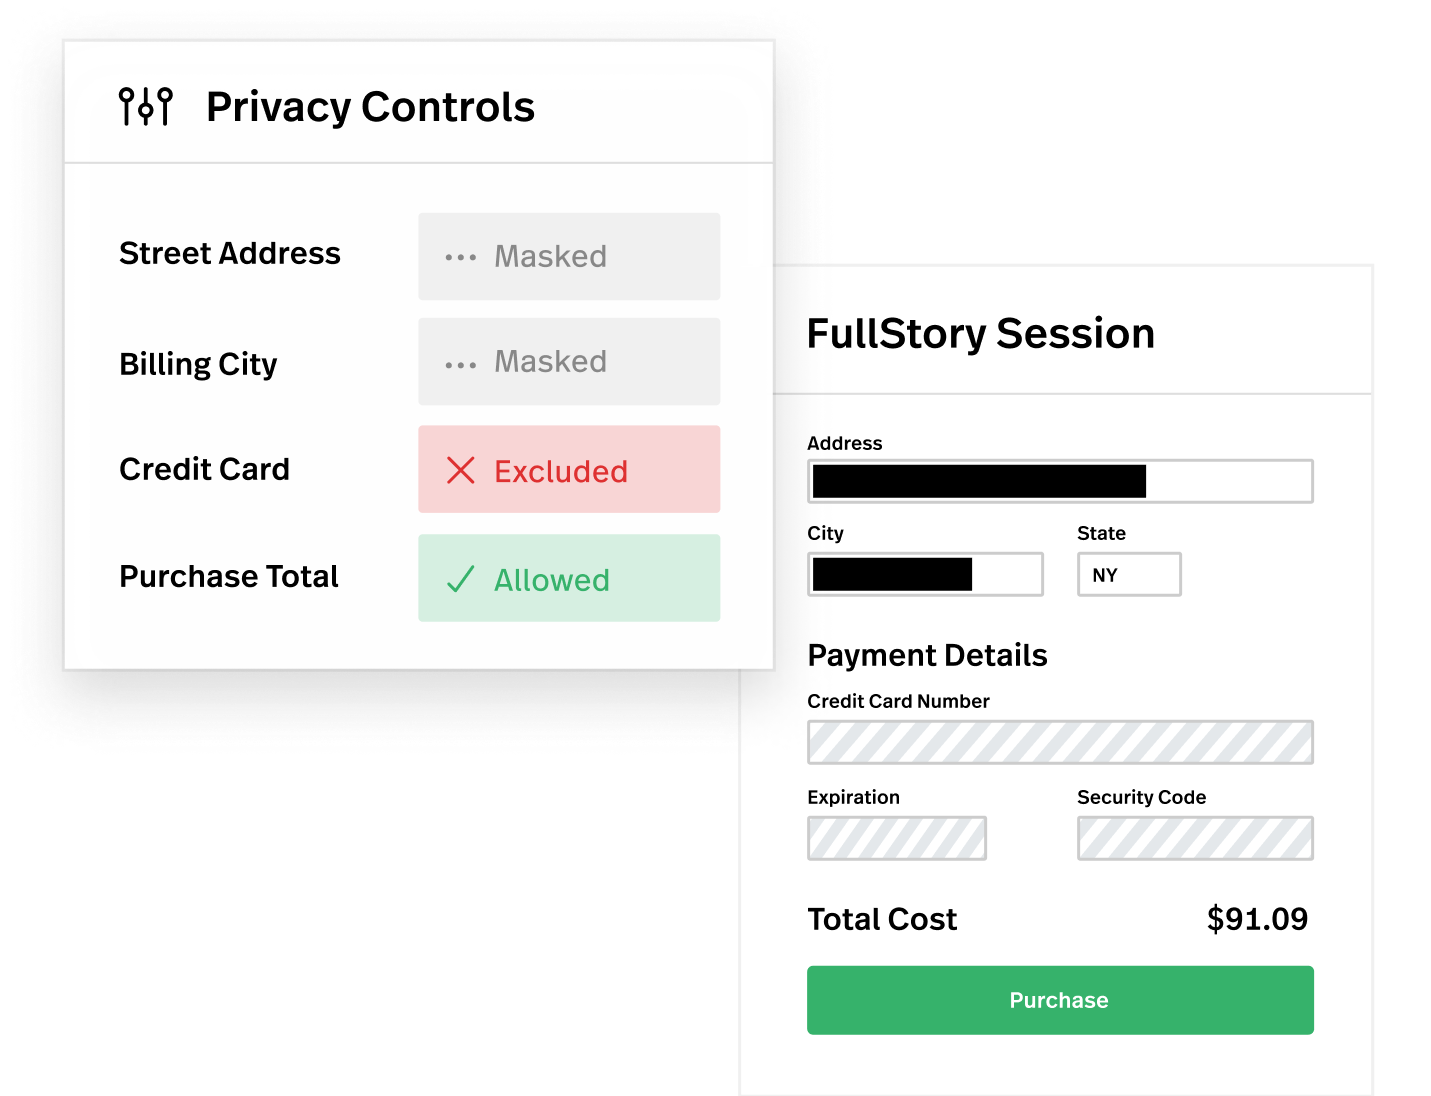 Privacy Controls & FullStory Session